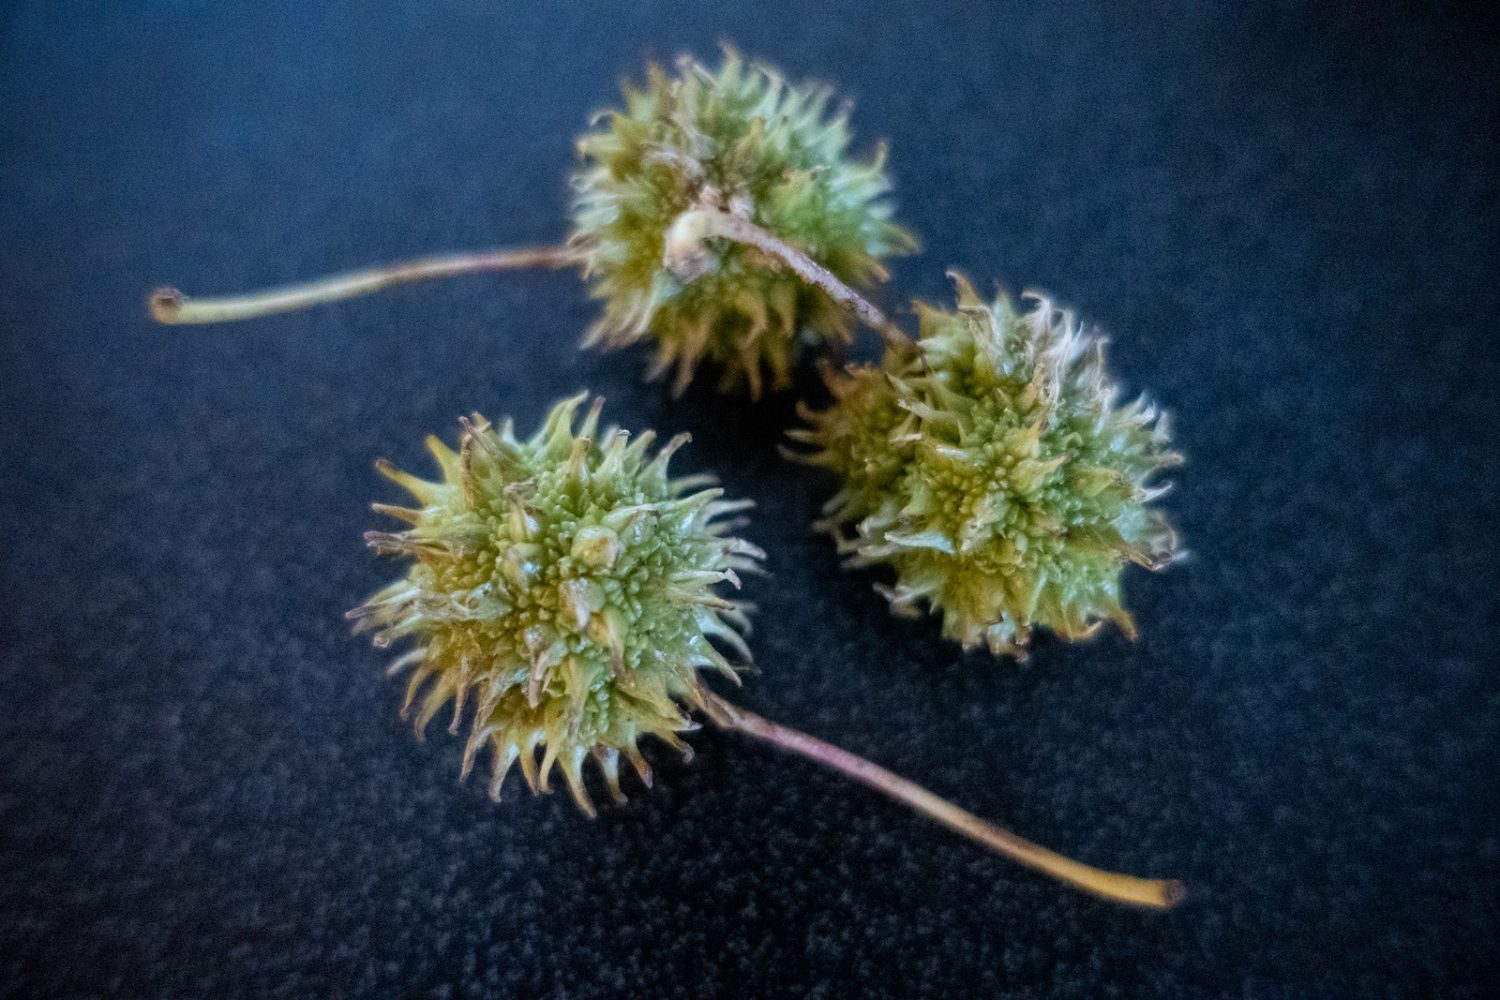 Sweet Gum seed pods from Horseshoe to Ridge Trail